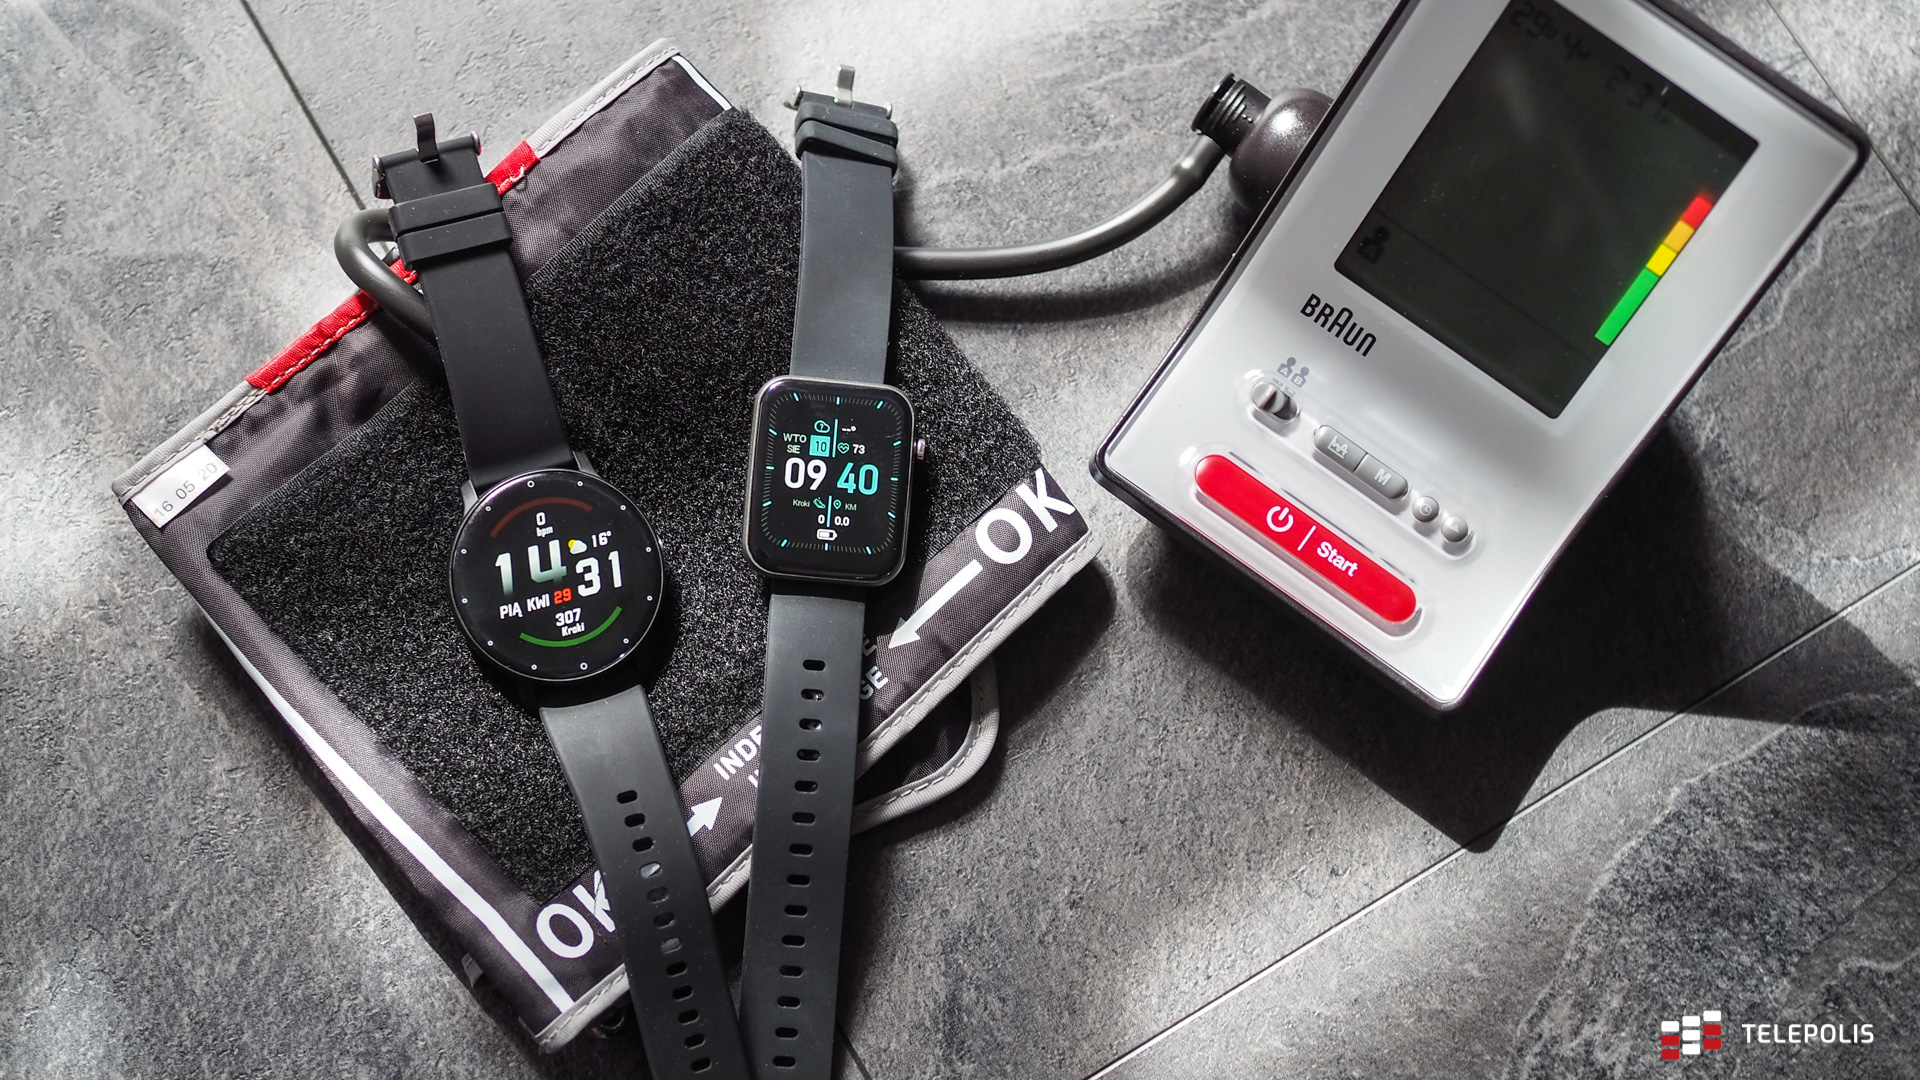 Hykker Smartwatch, 2 Watches and Blood Pressure Monitor